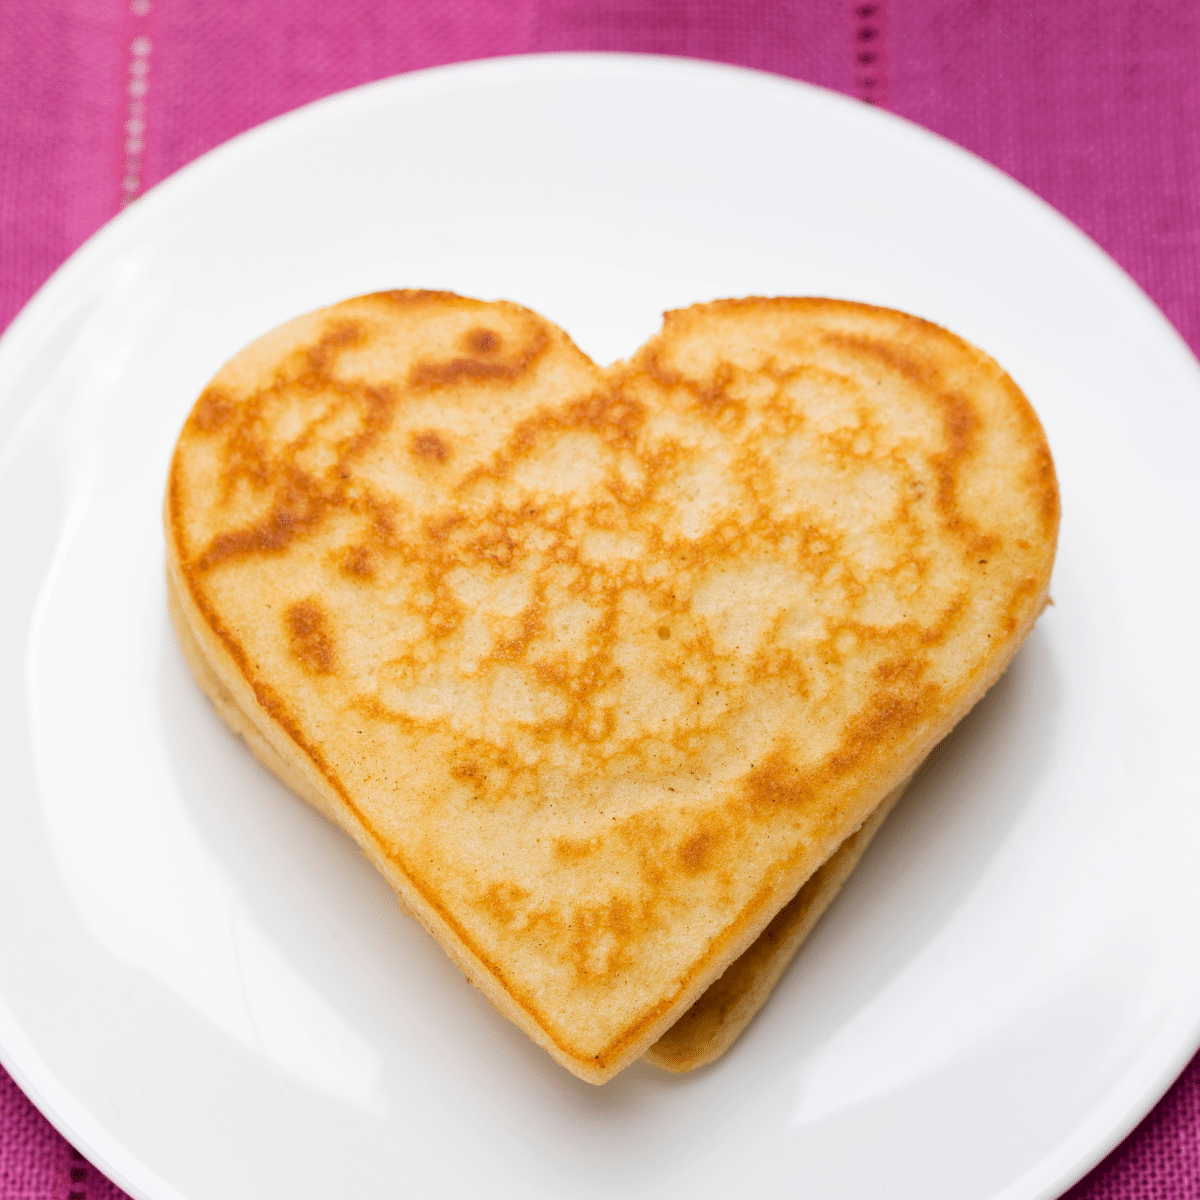 two heart-shaped pancakes on a white plate on top of a pink tablecloth